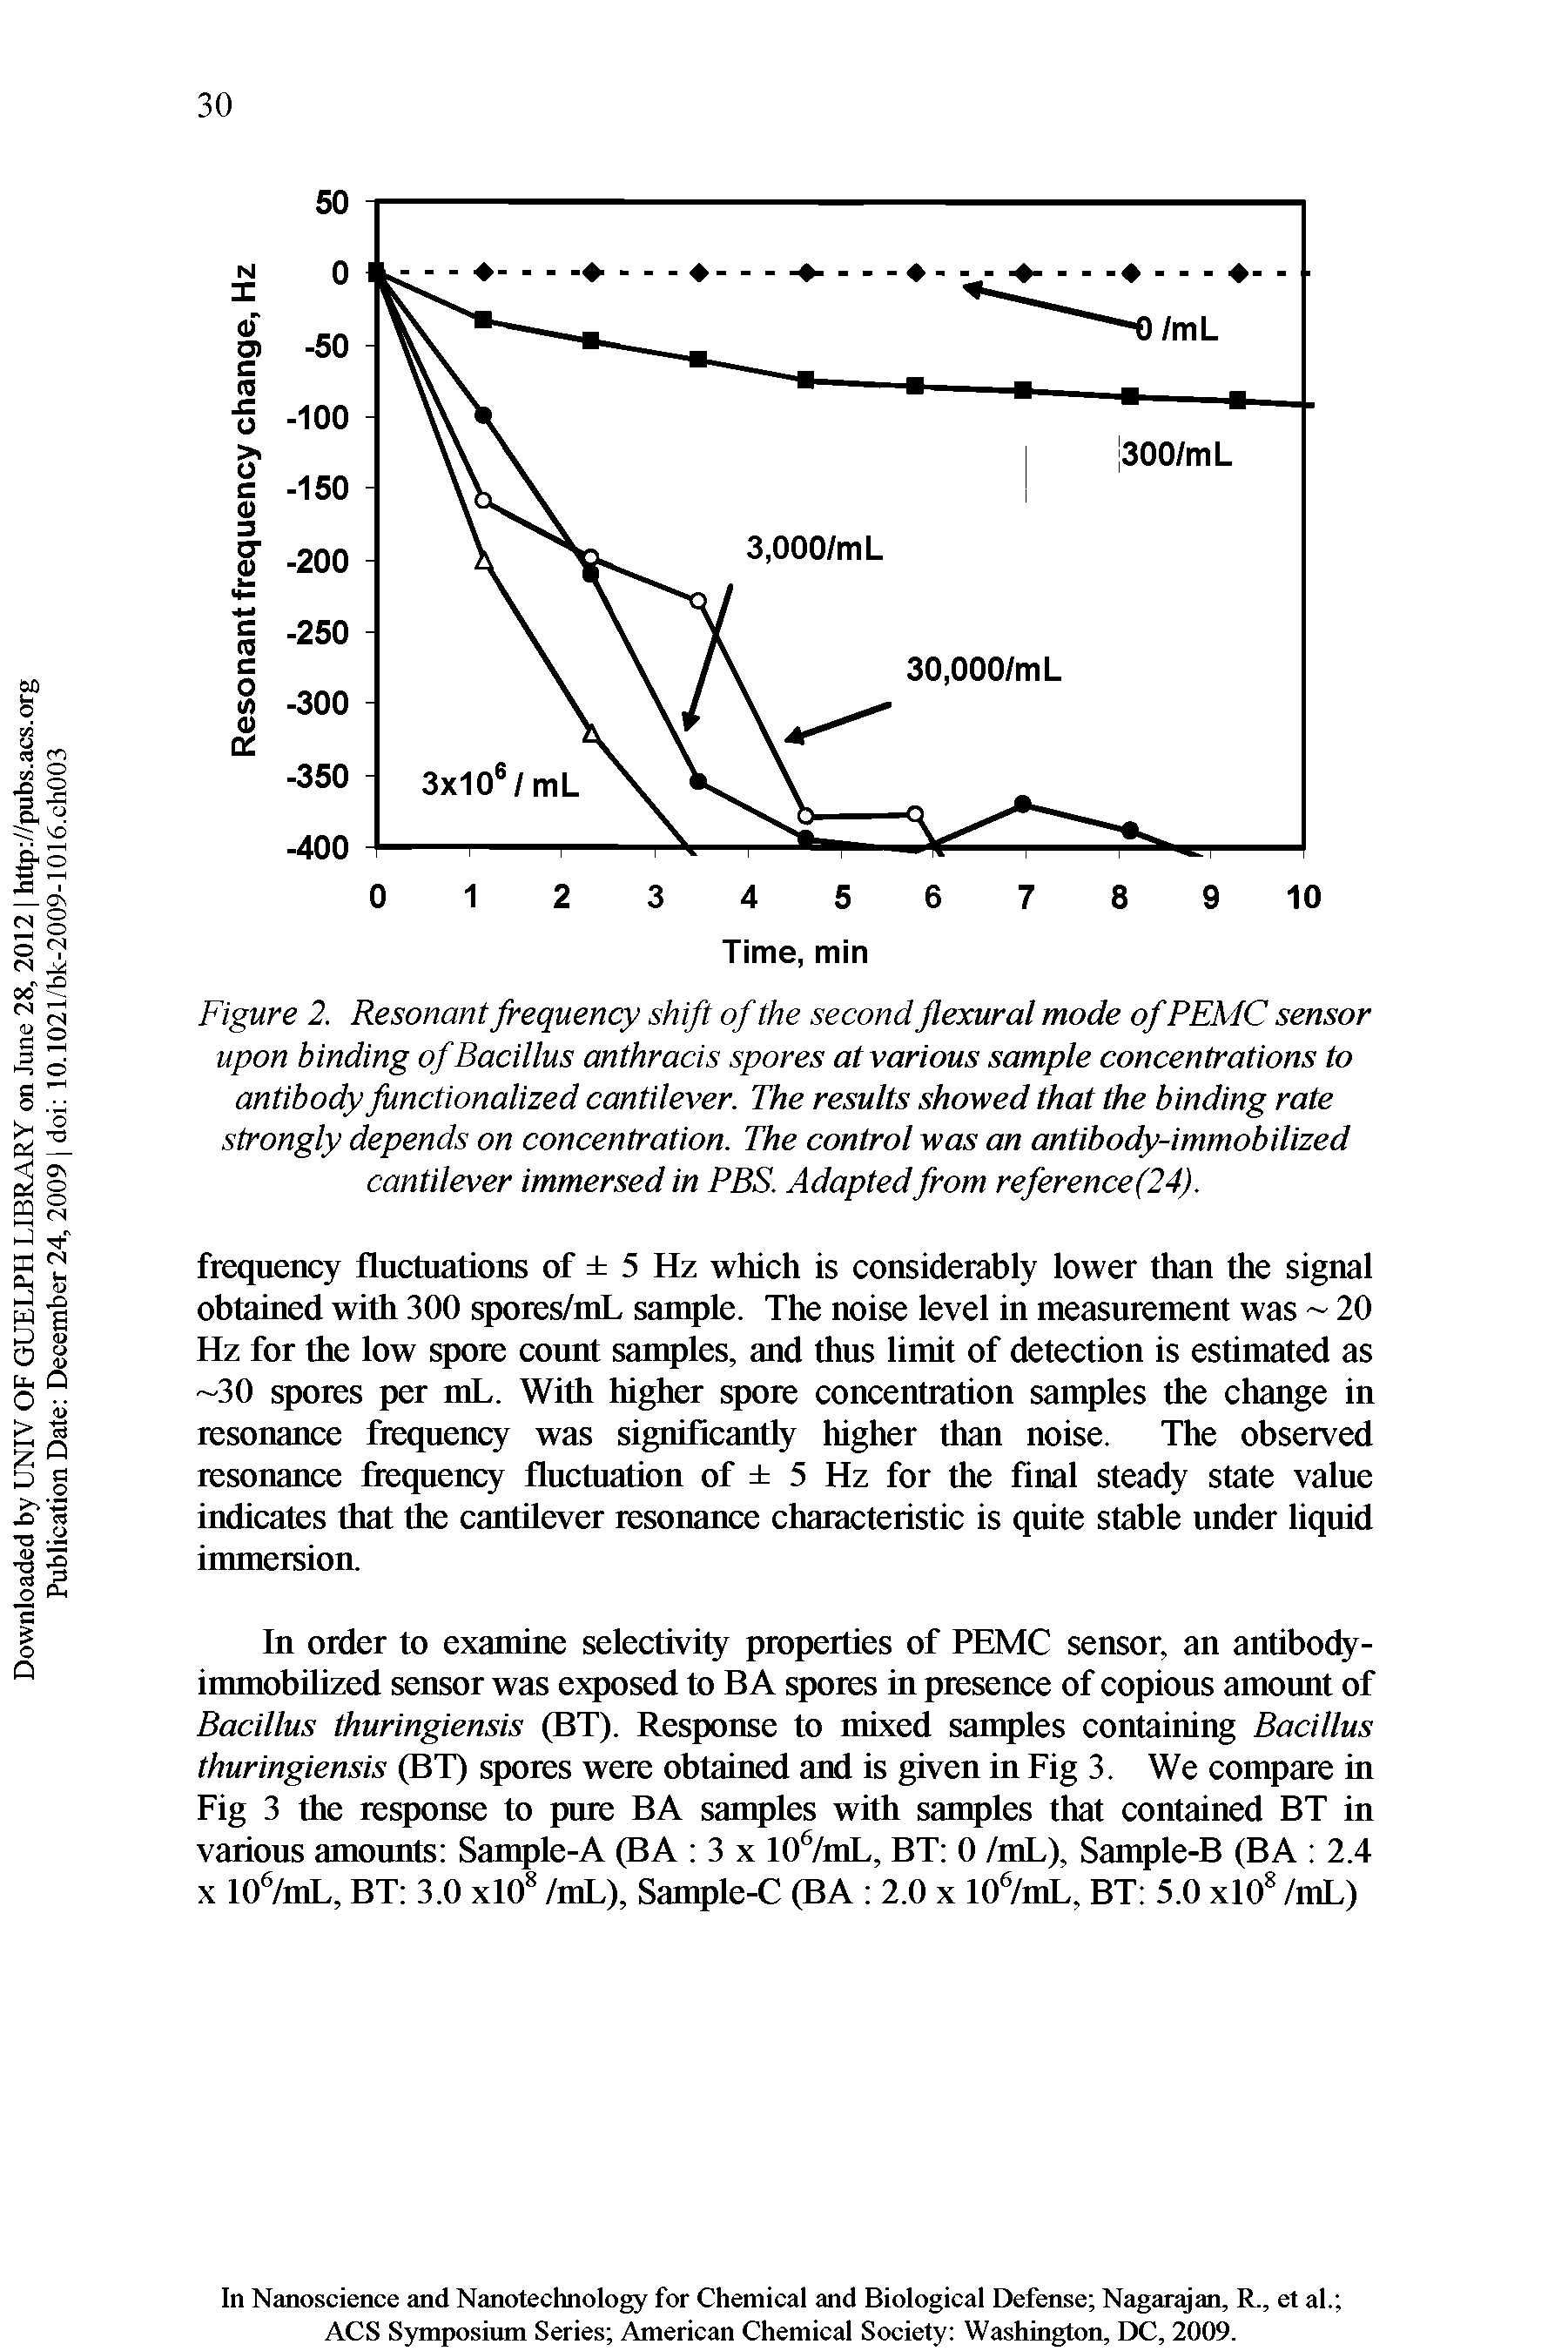 Figure 2. Resonant frequency shift of the second flexural mode ofPEMC sensor upon binding of Bacillus anthracis spores at various sample concentrations to antibody functionalized cantilever. The results showed that the binding rate strongly depends on concentration. The control was an antibody-immobilized cantilever immersed in PBS. Adapted from reference(24).